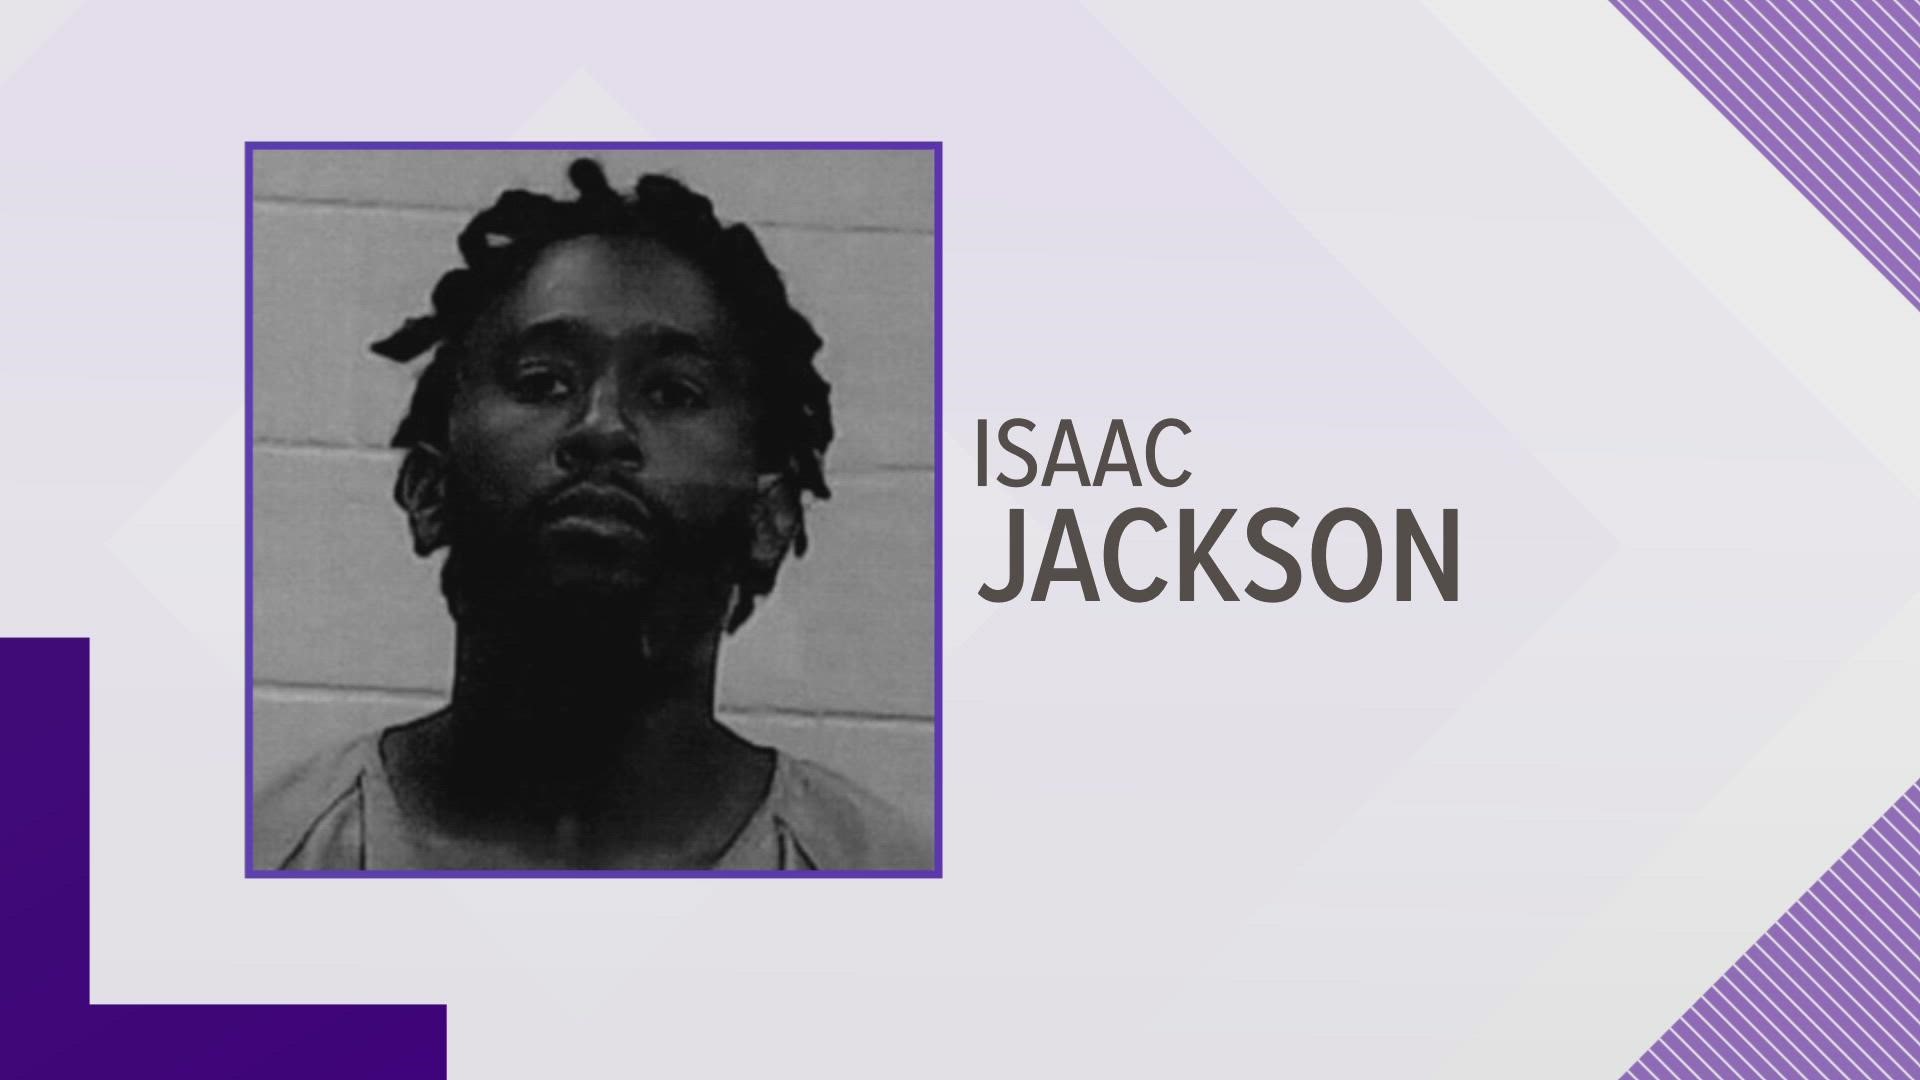 33-year-old Isaac Jackson was charged with Aggravated Robbery and his sentence was enhanced due to prior felonies.